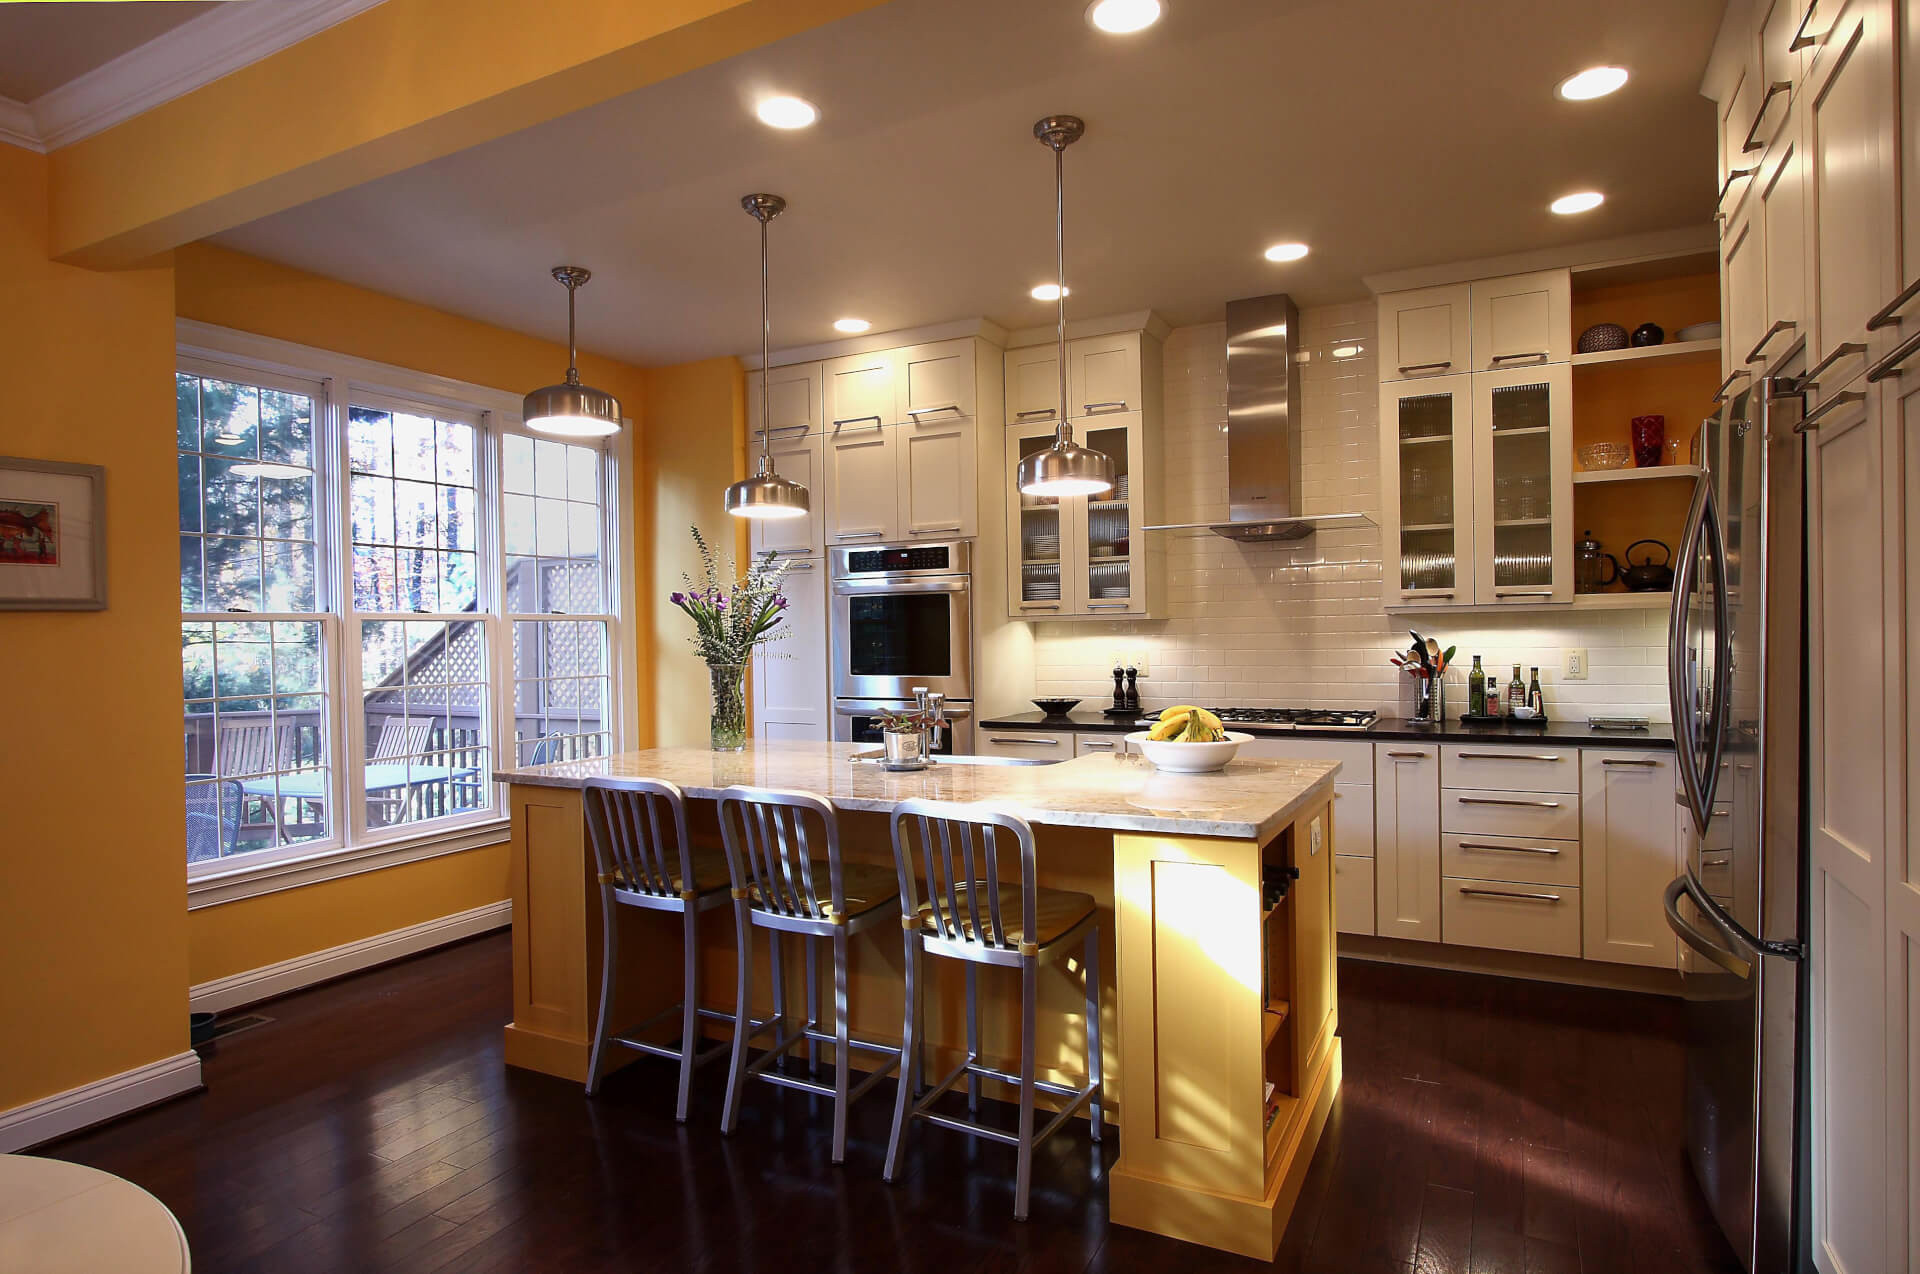 Small Kitchen Paint Colours
 Kitchen Colors How to choose what colors to paint your